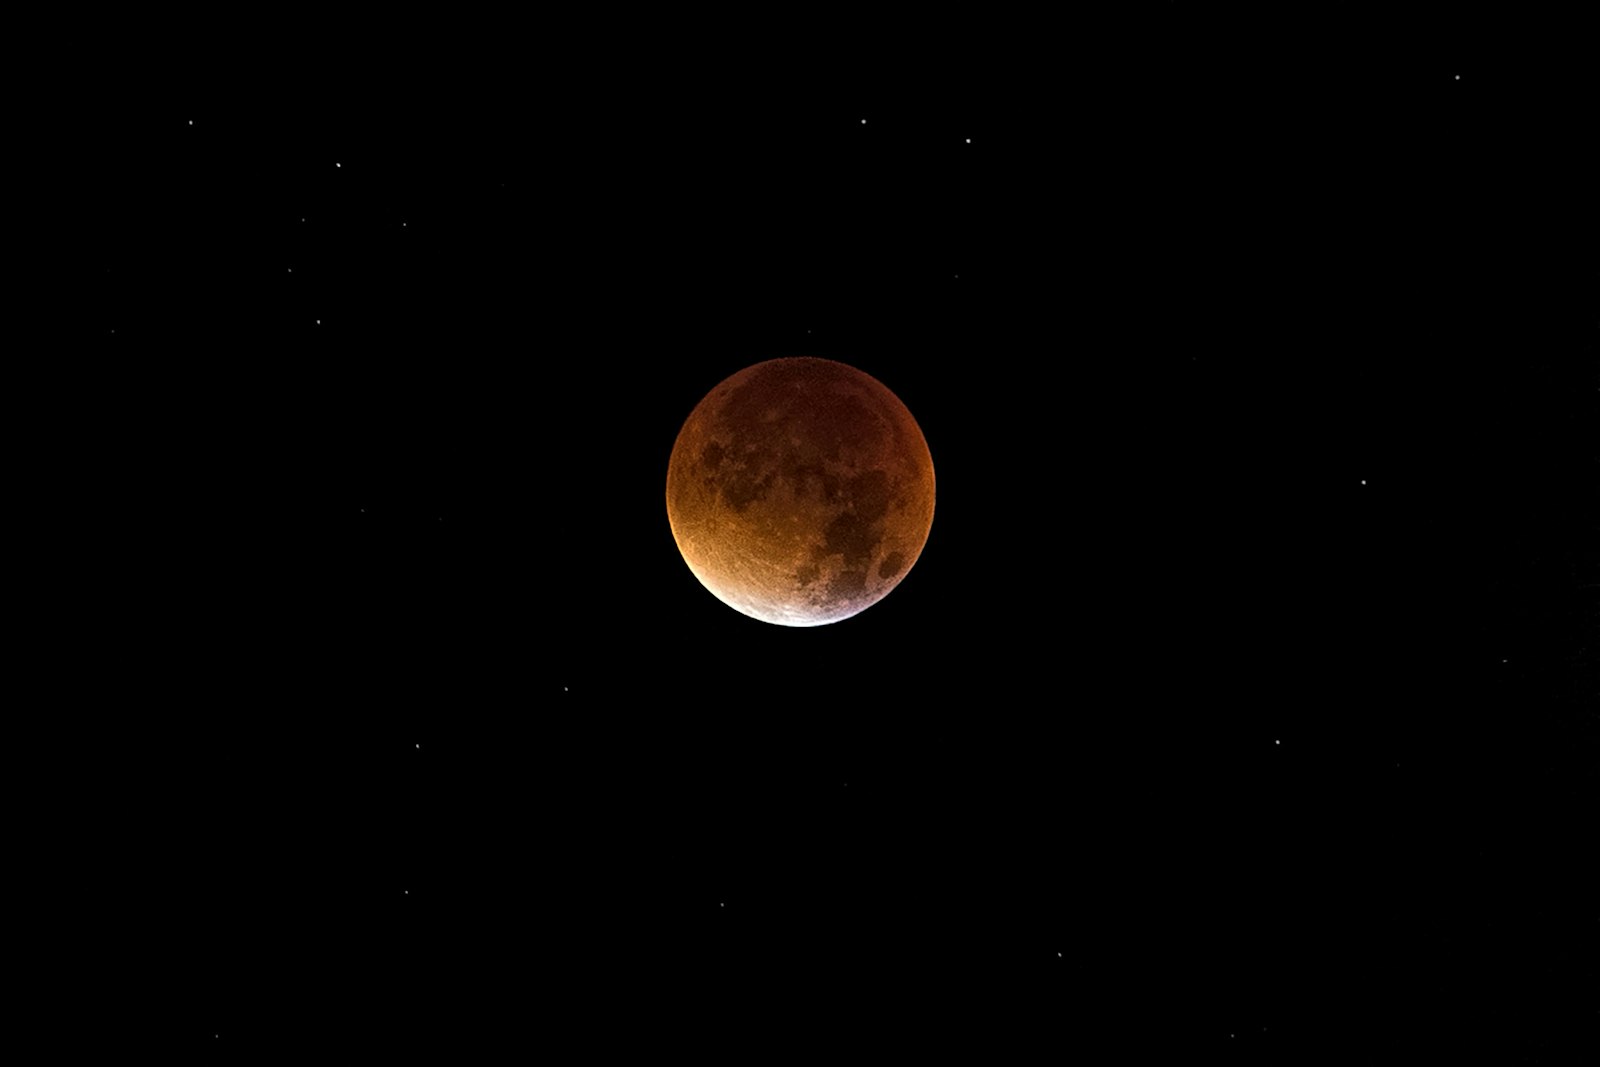 Sony a7 + Tamron 18-270mm F3.5-6.3 Di II PZD sample photo. Partial lunar eclipse photography